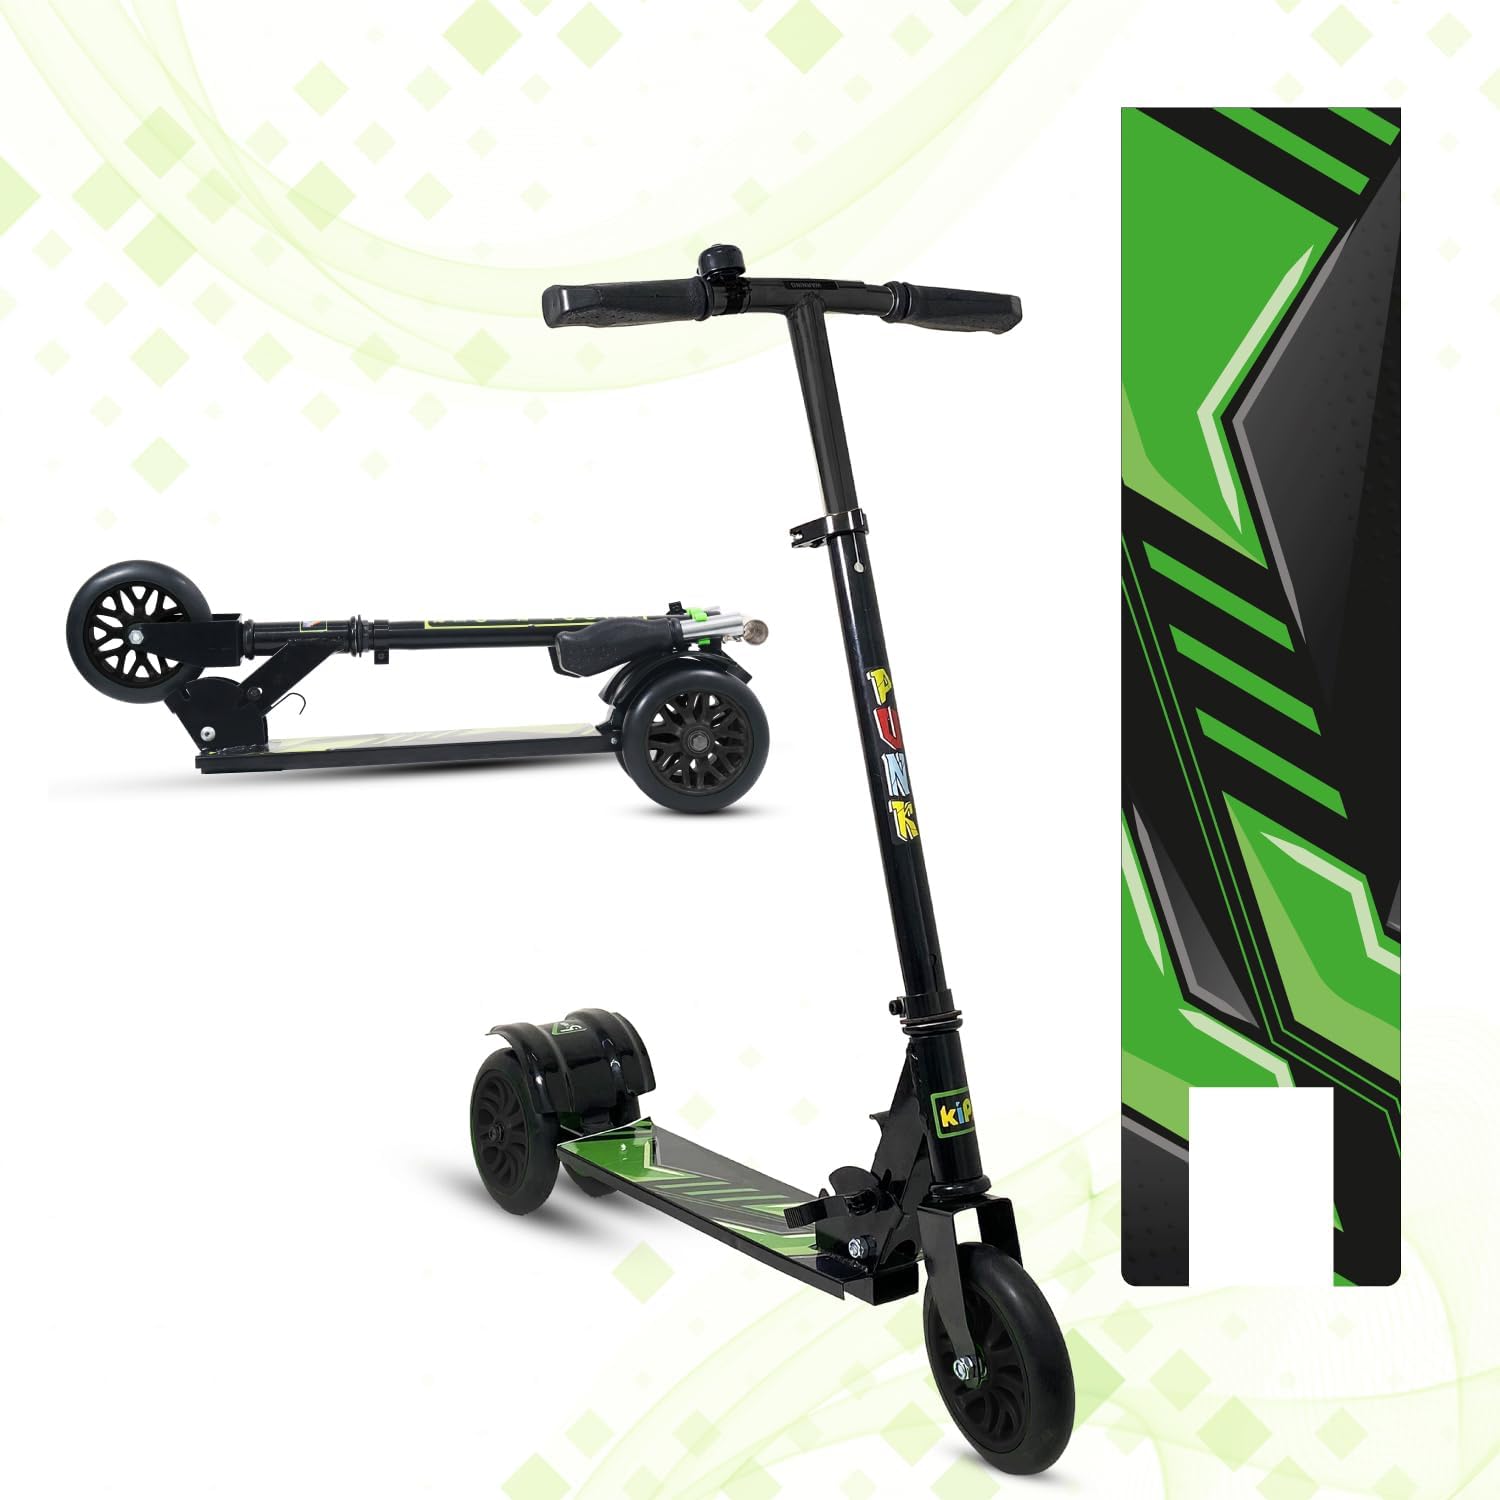 Braintastic 3-Wheel Design Drift Kick Scooter with Rear Break 3-Level Height Adjustment PVC Wheels Weight Capacity 50 kg for Kids